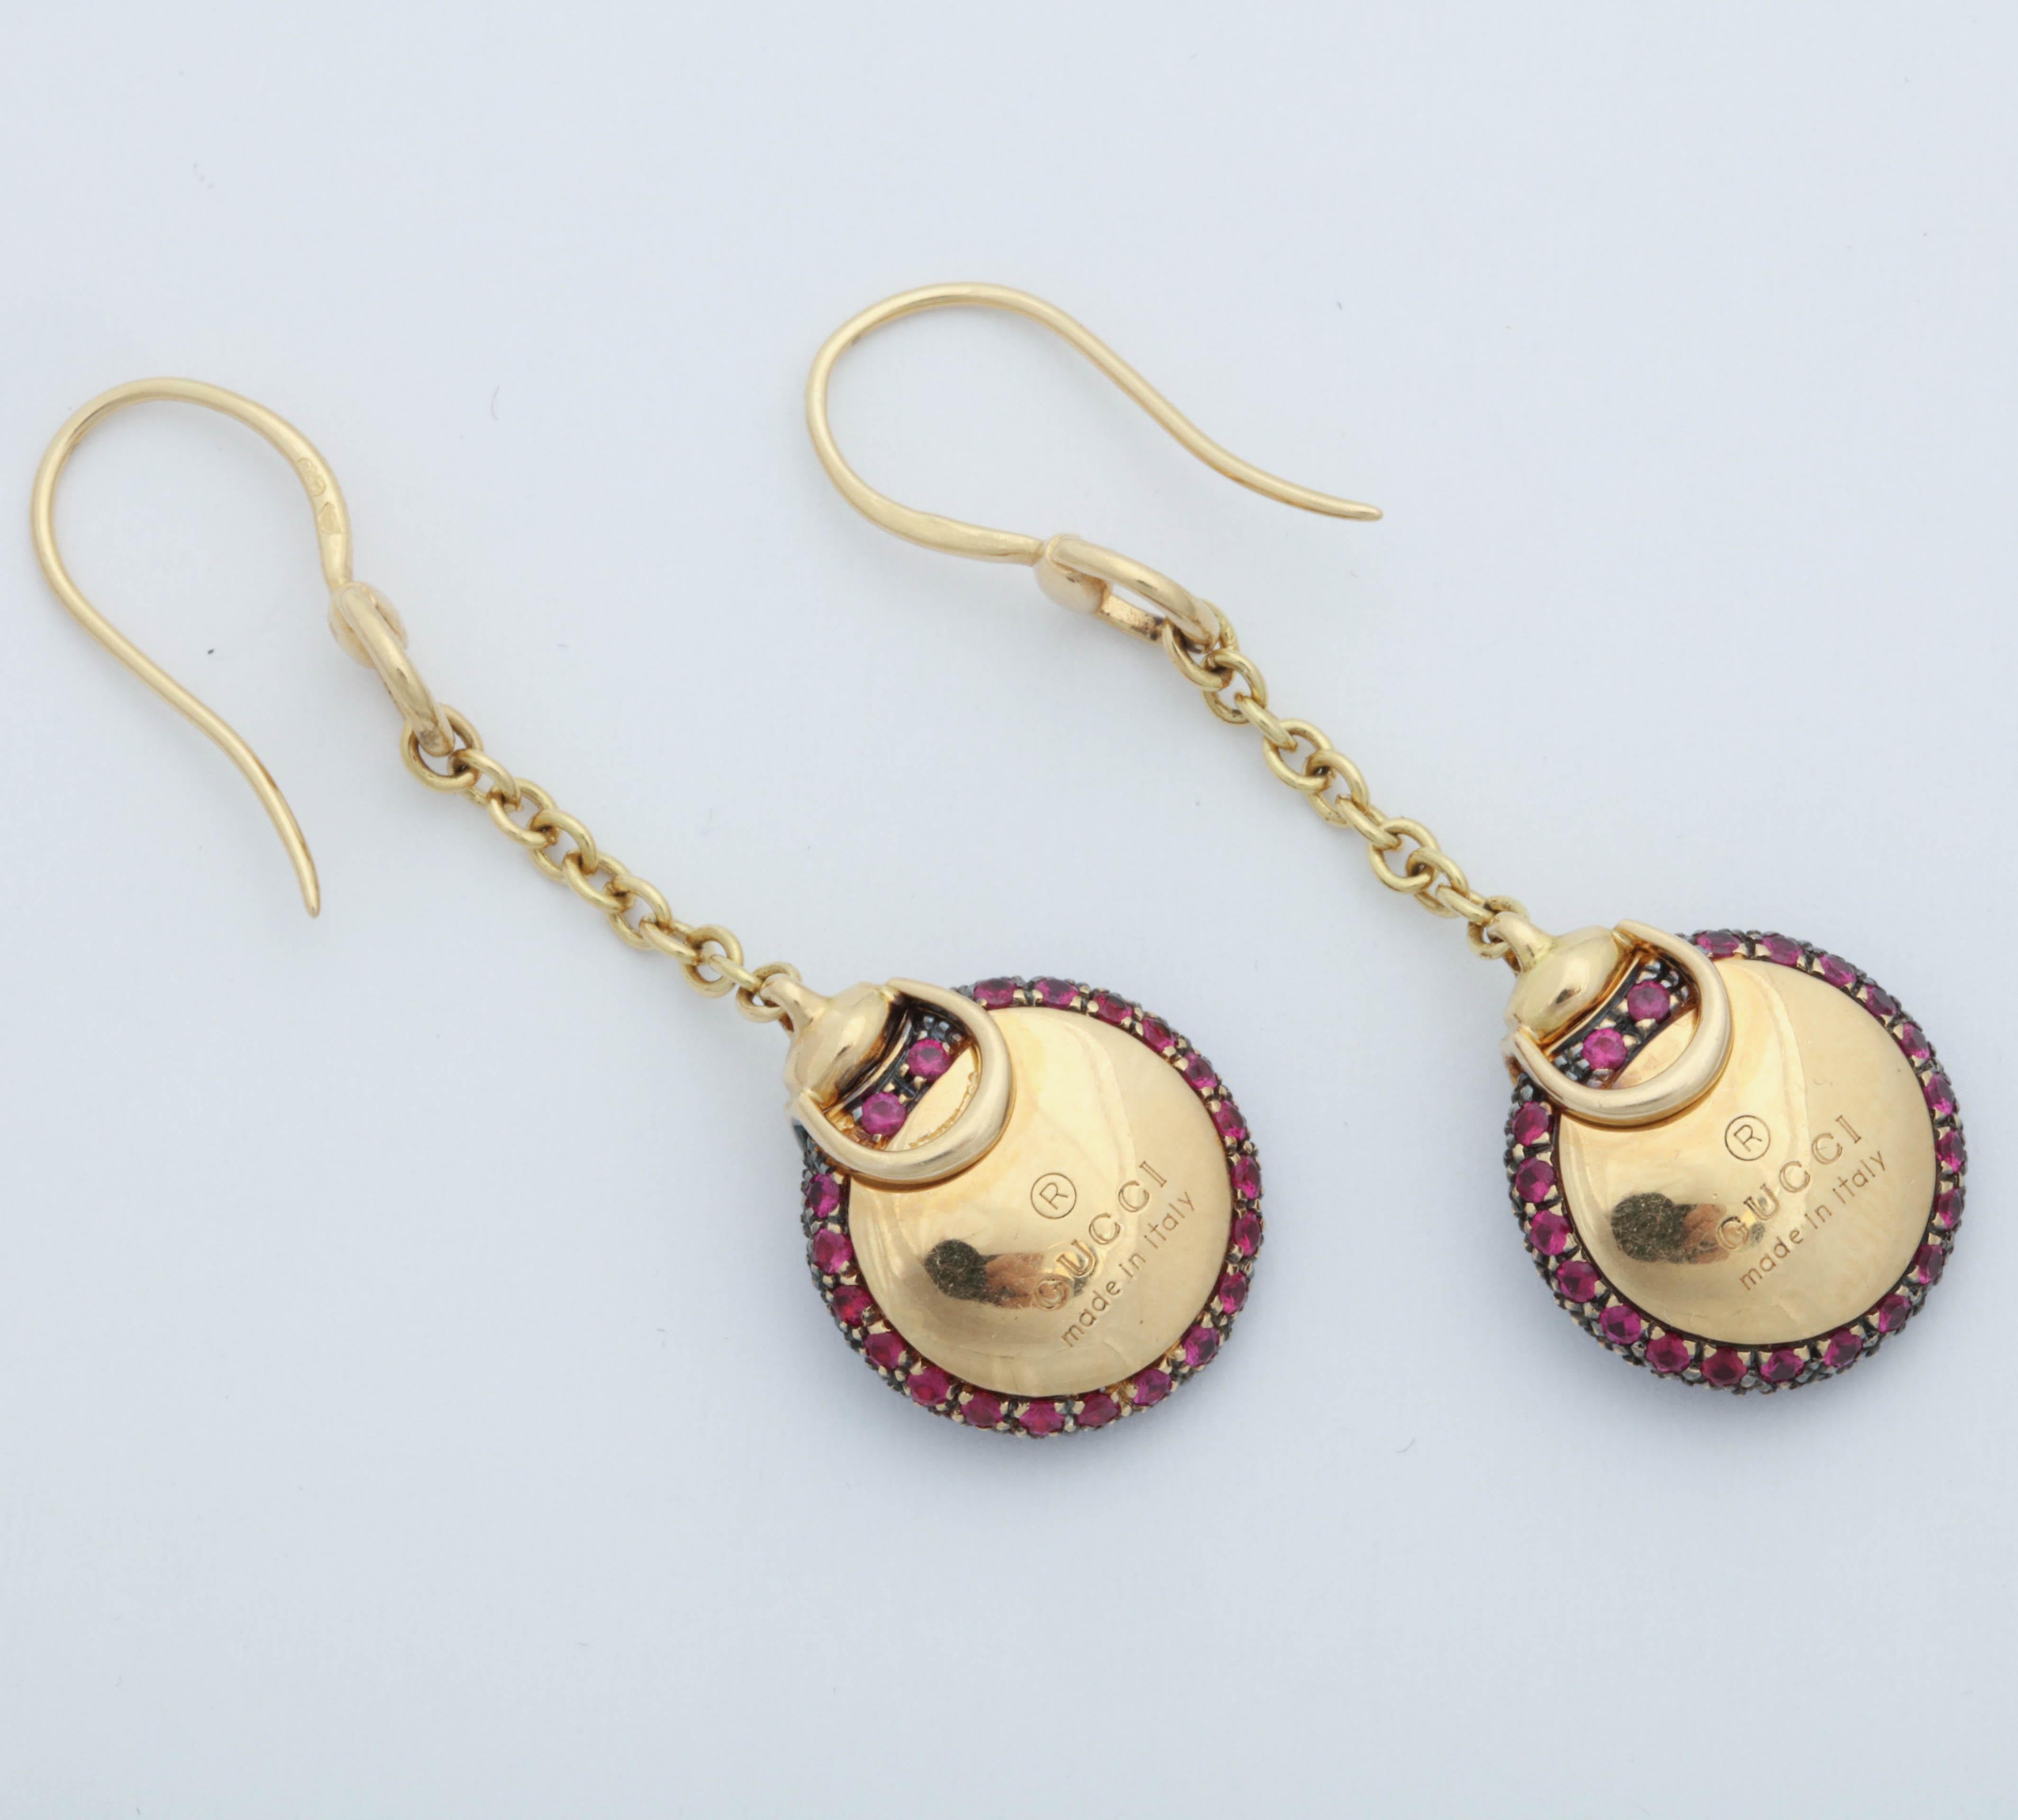 Women's 1990s Gucci Ruby and Gold Pendant Drop Earrings with Shephards Hook Closures